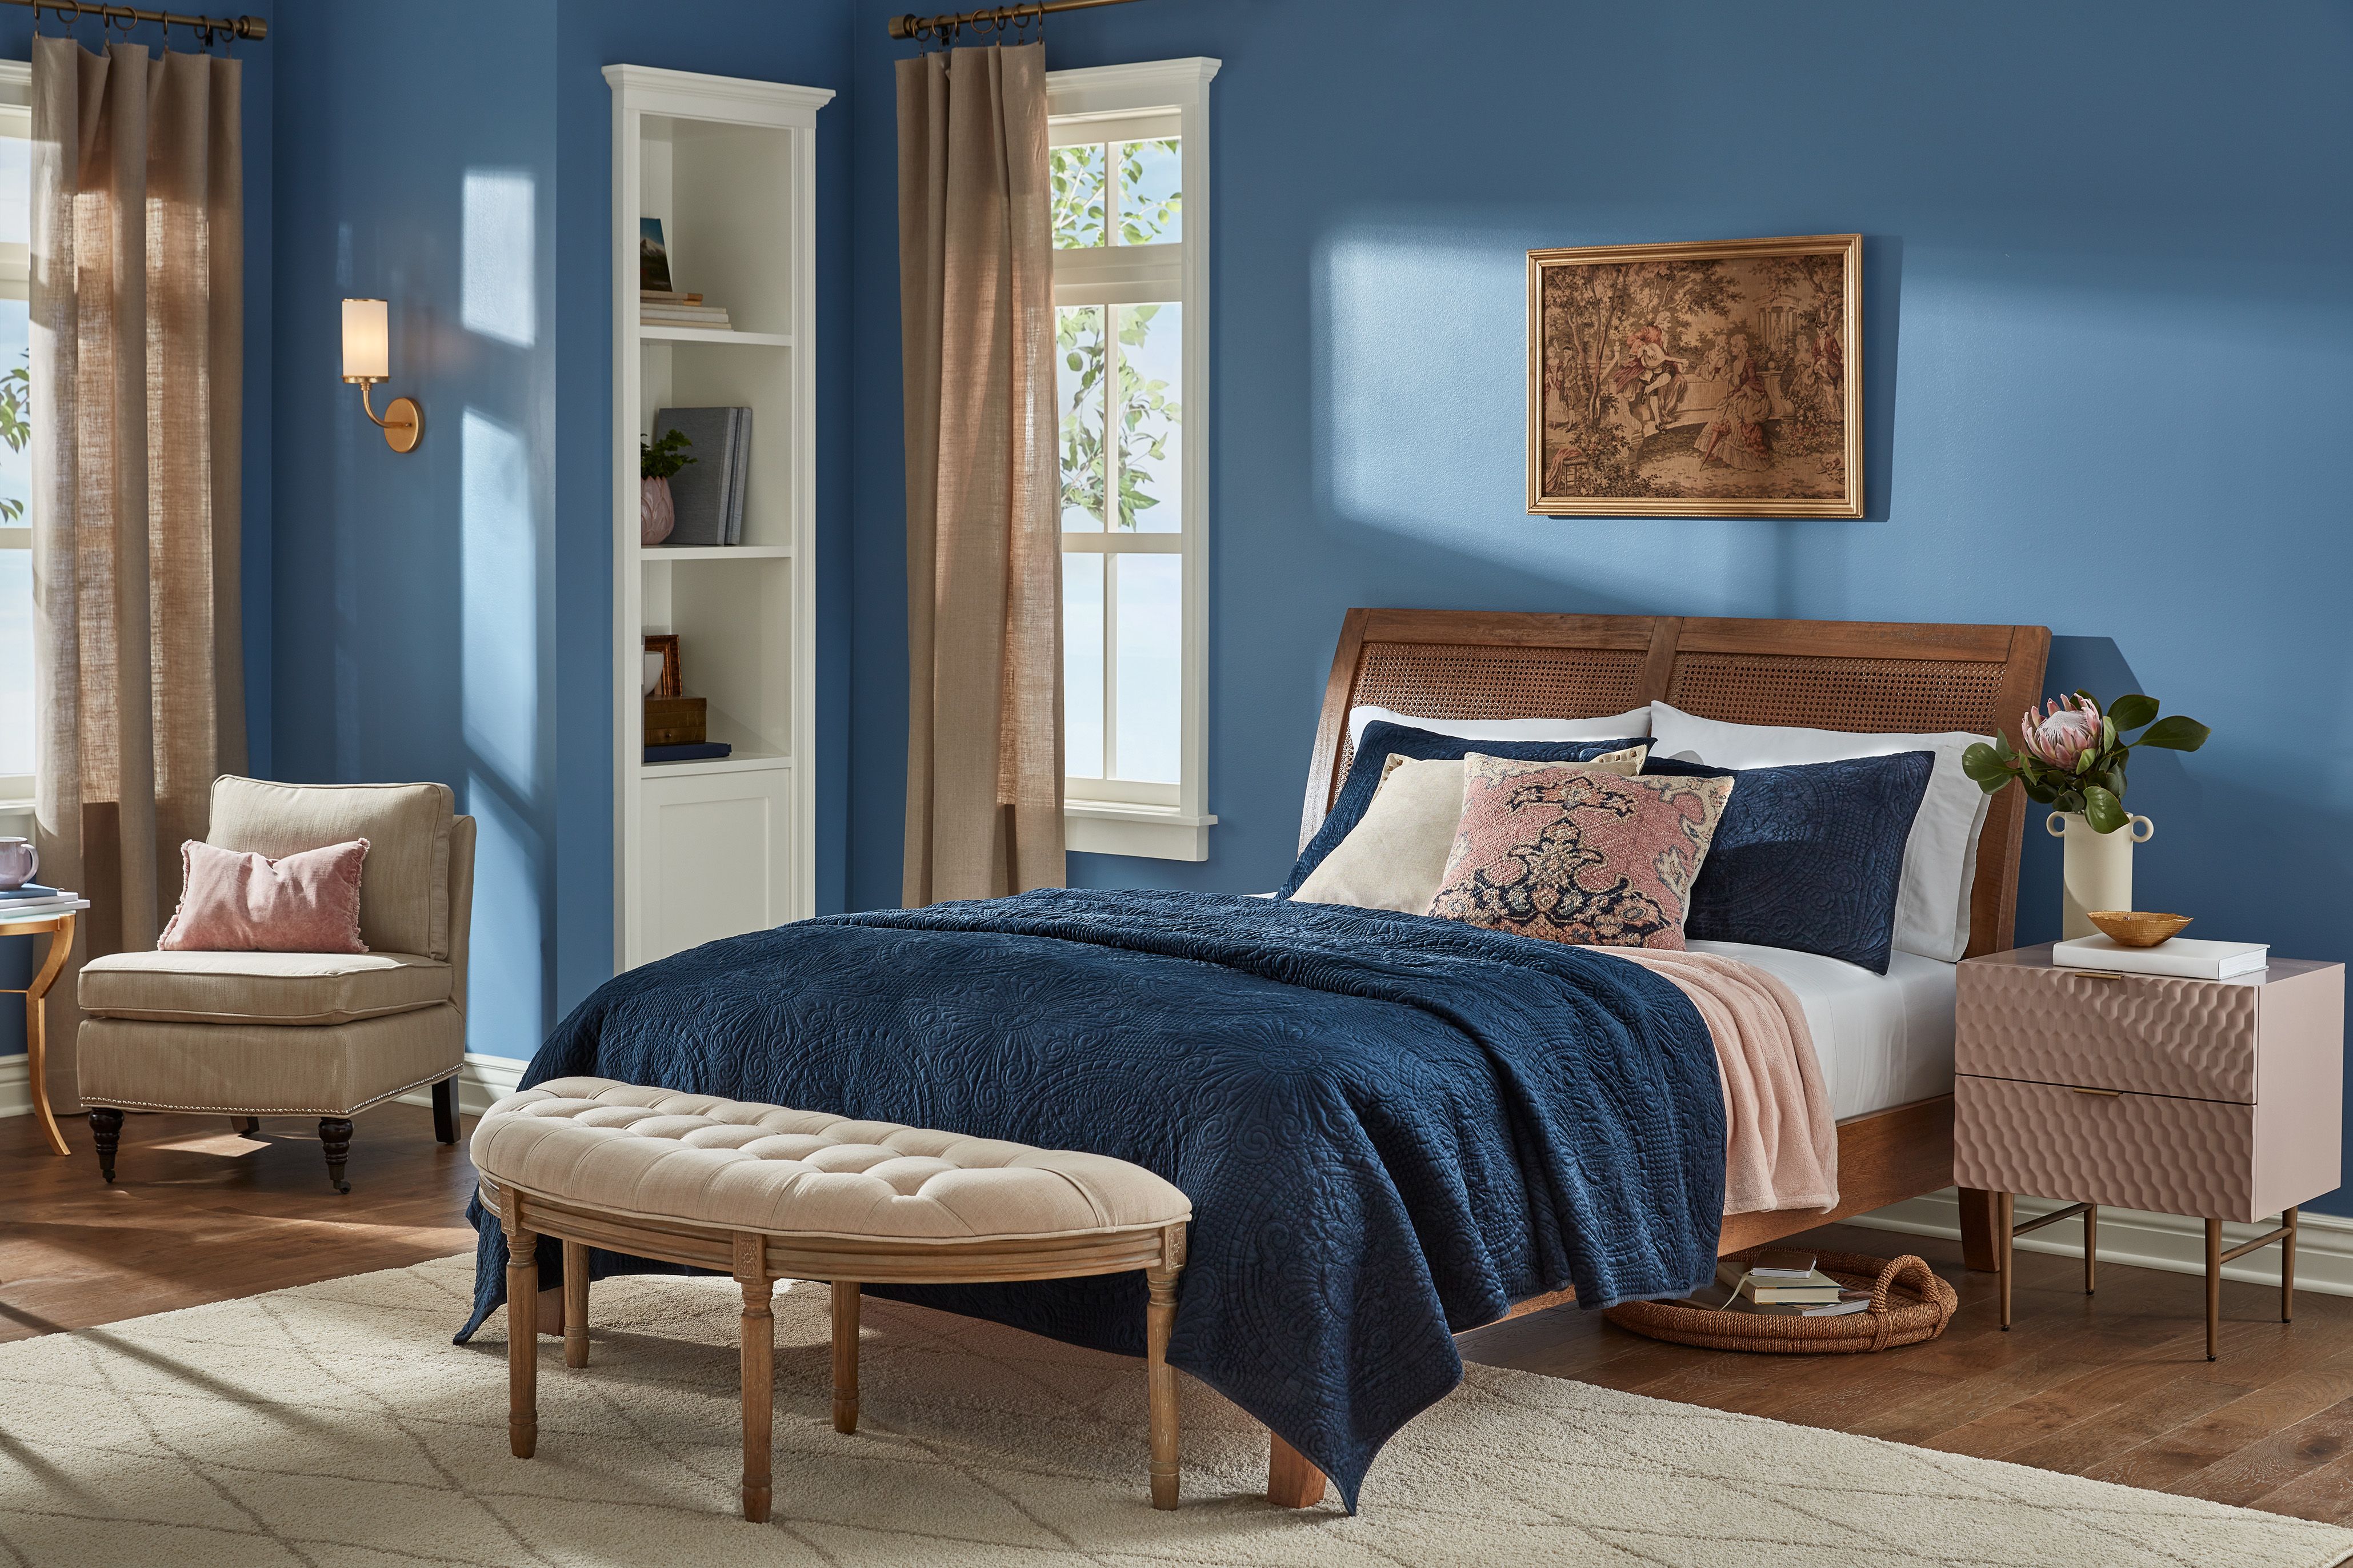 Hgtv Home By Sherwin Williams S 2020 Color Of The Year Is